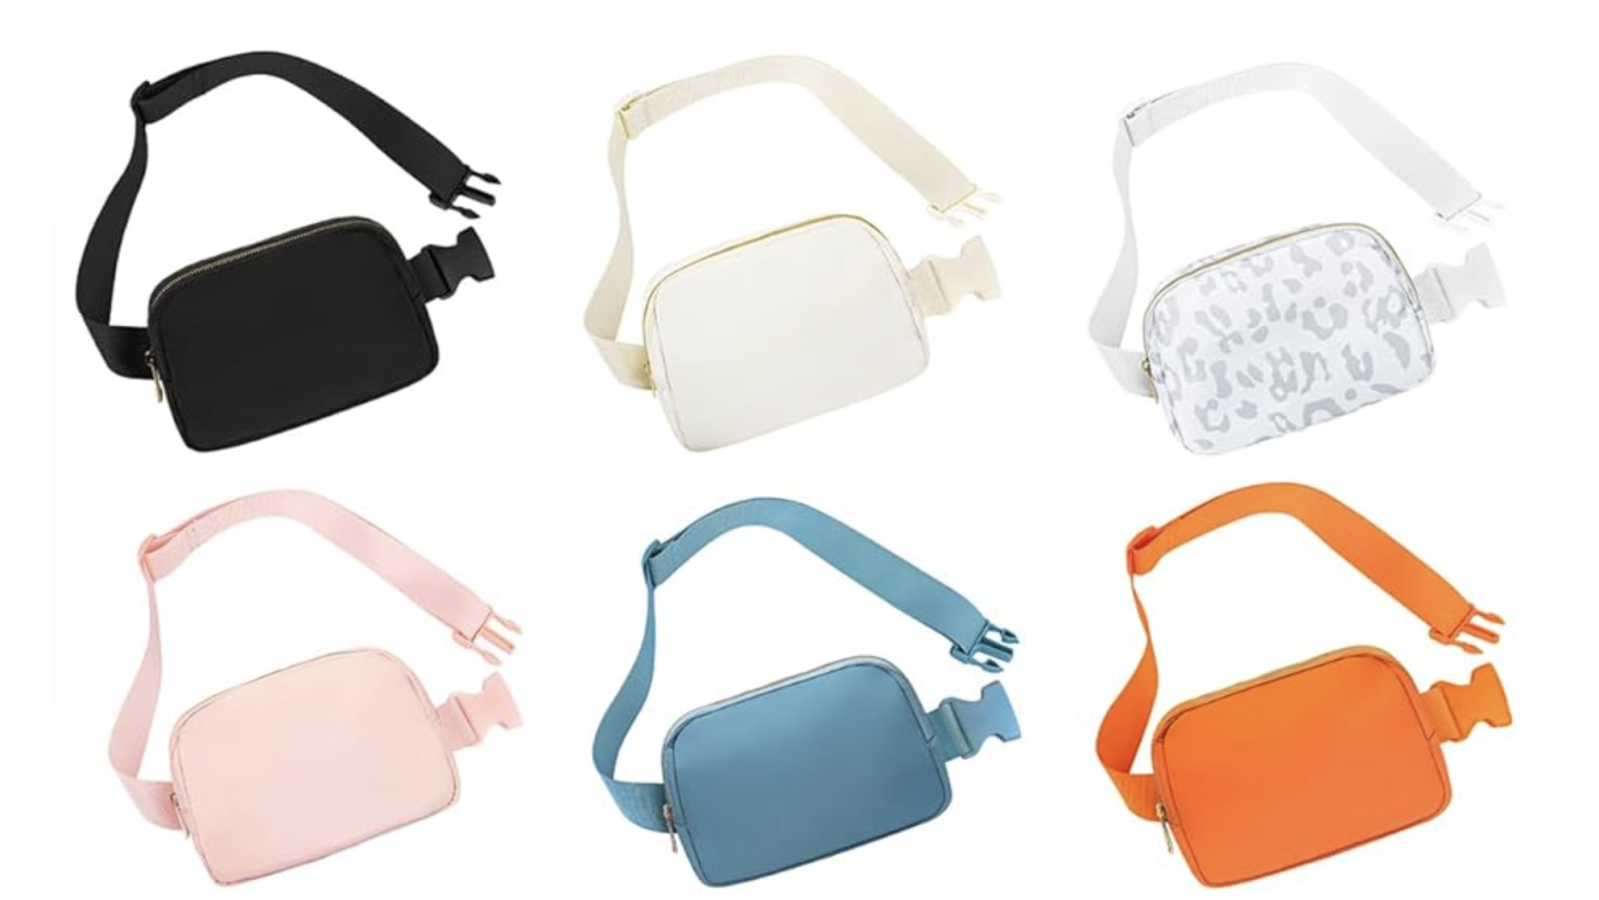 This Belt Bag Is Just $7 and Looks Like a Wildly Popular Brand - Us Weekly